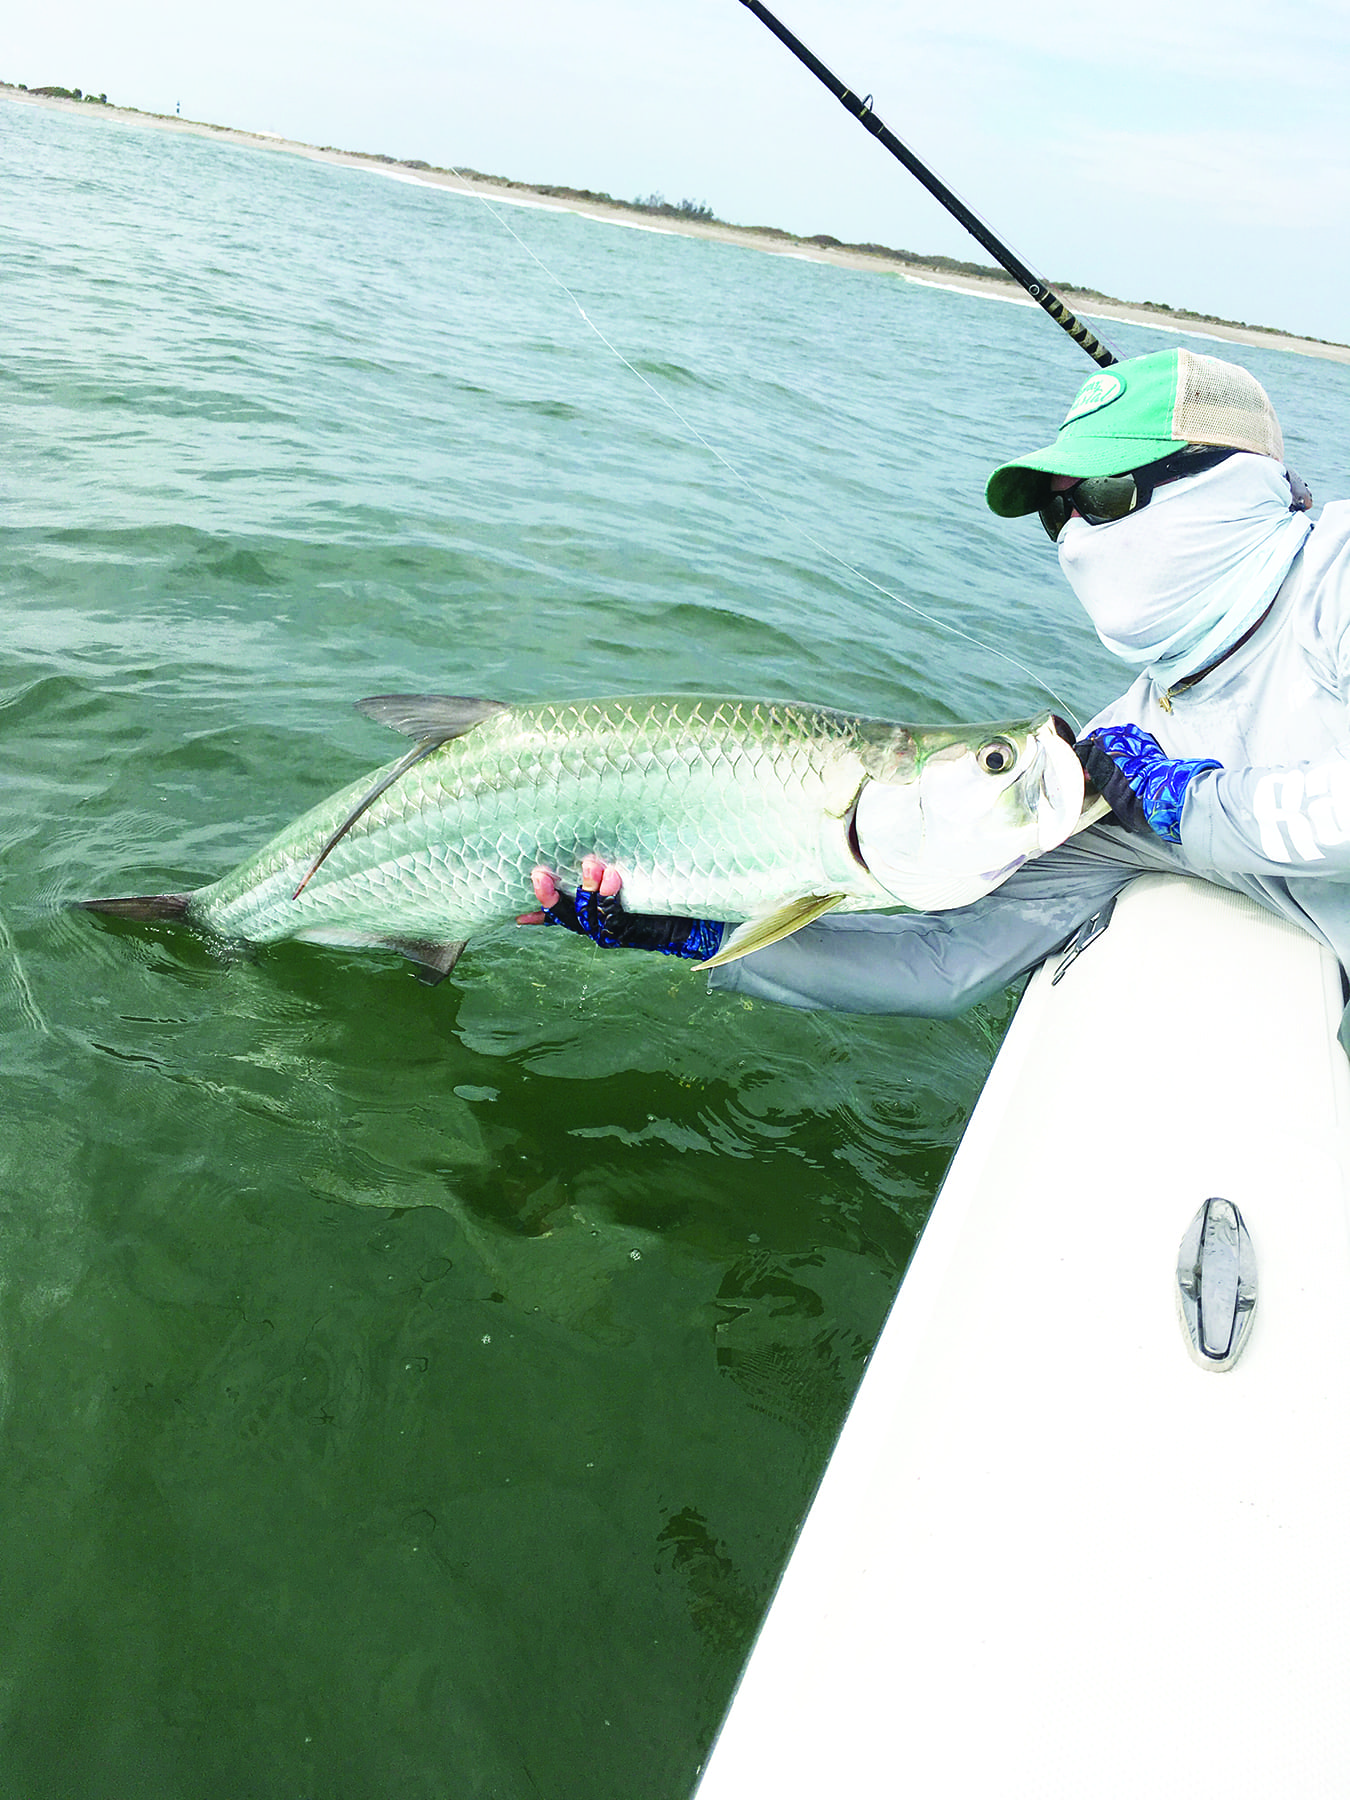 If the water conditions stay fairly warm, Baby tarpon may be one of the species anglers can expect at Canaveral this month.